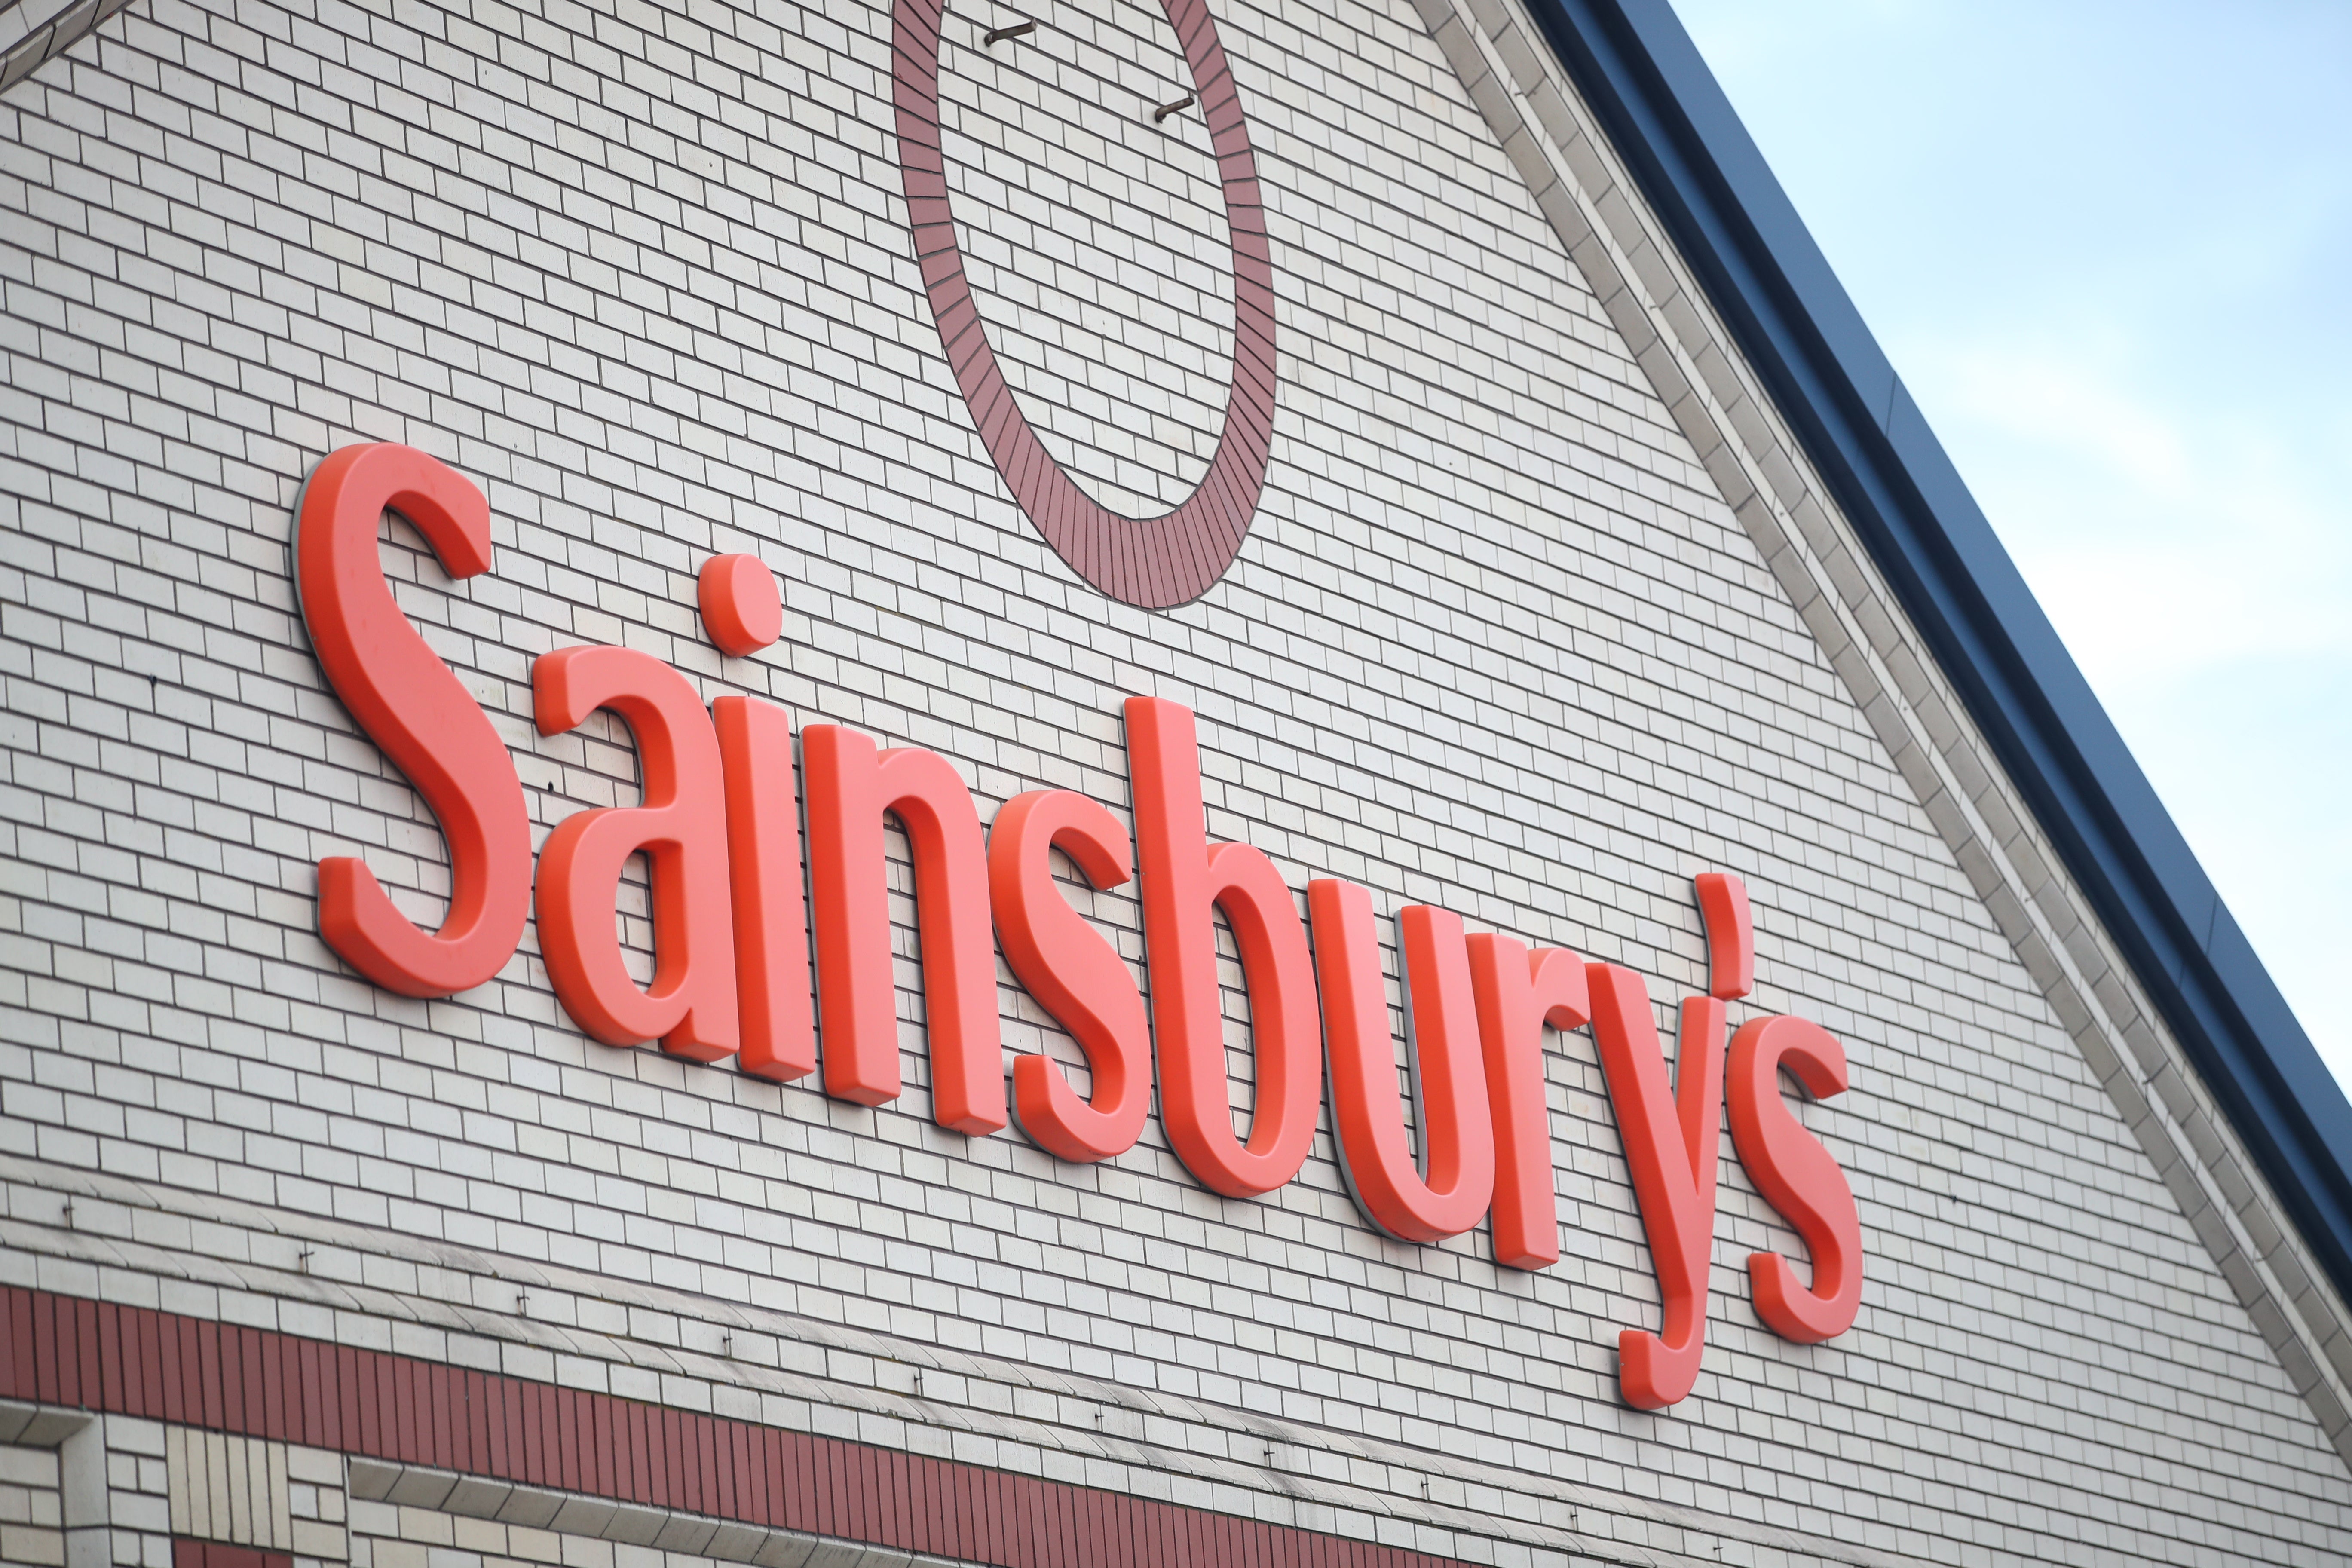 Sainsbury’s said its main supermarkets will shut but some convenience stores will open later in the day (Danny Lawson/PA)